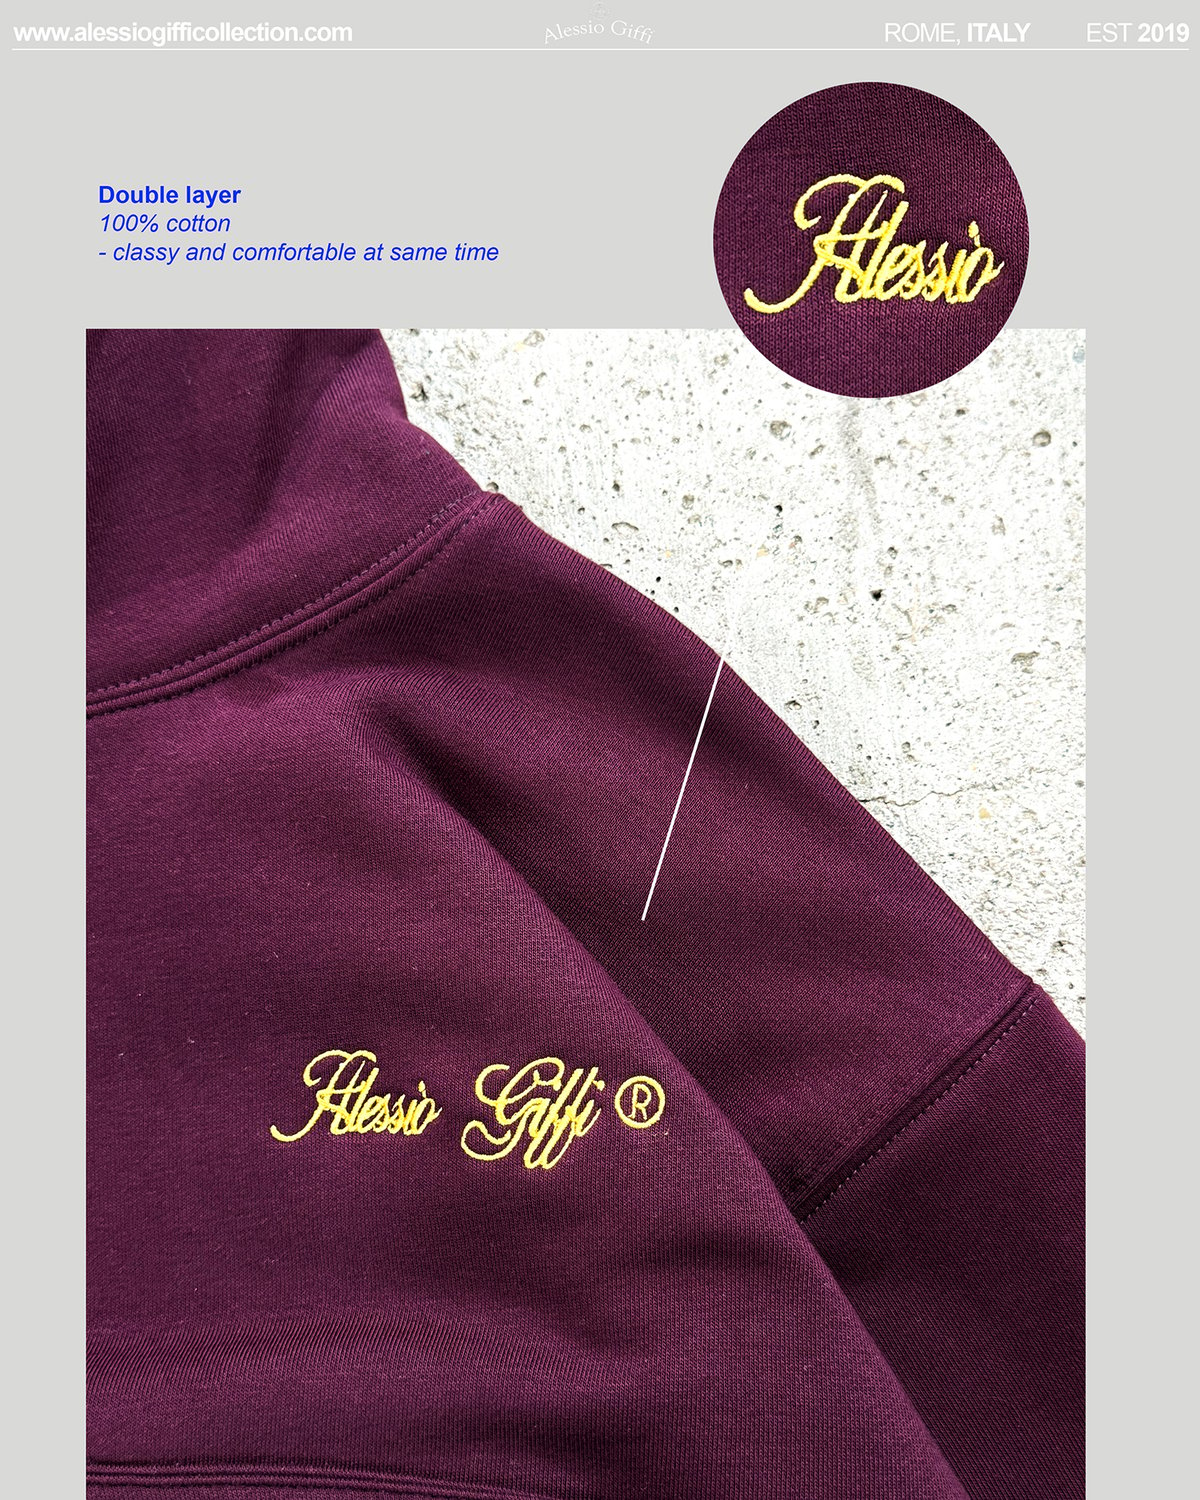 Image of Red Wine Perfect Hoodie🍷